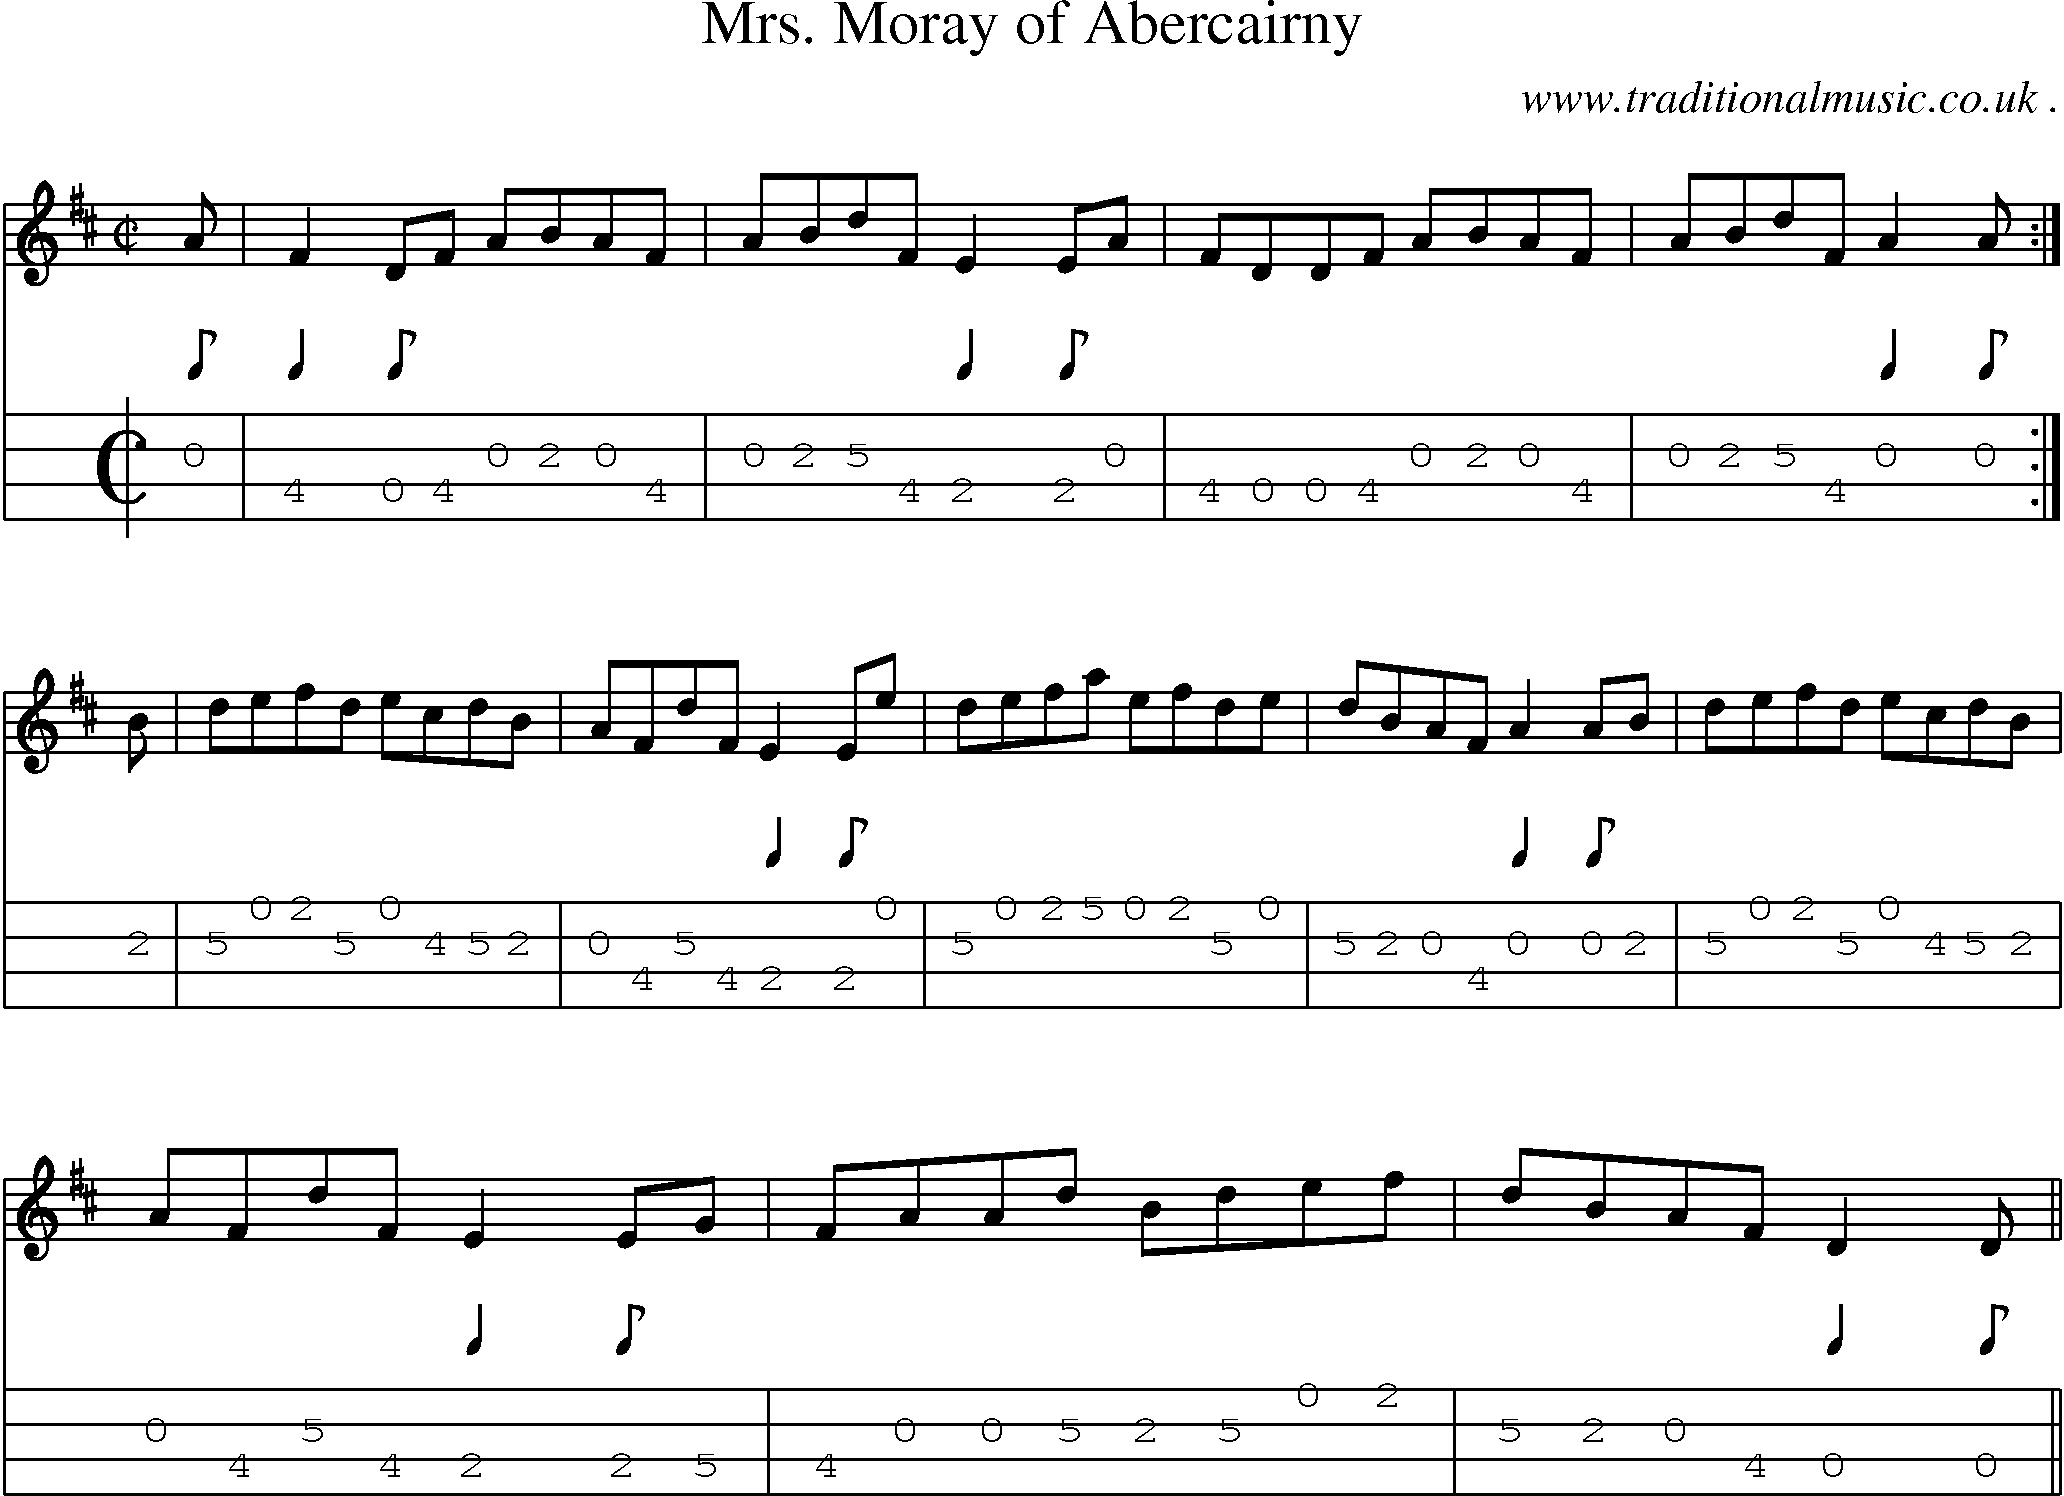 Sheet-music  score, Chords and Mandolin Tabs for Mrs Moray Of Abercairny